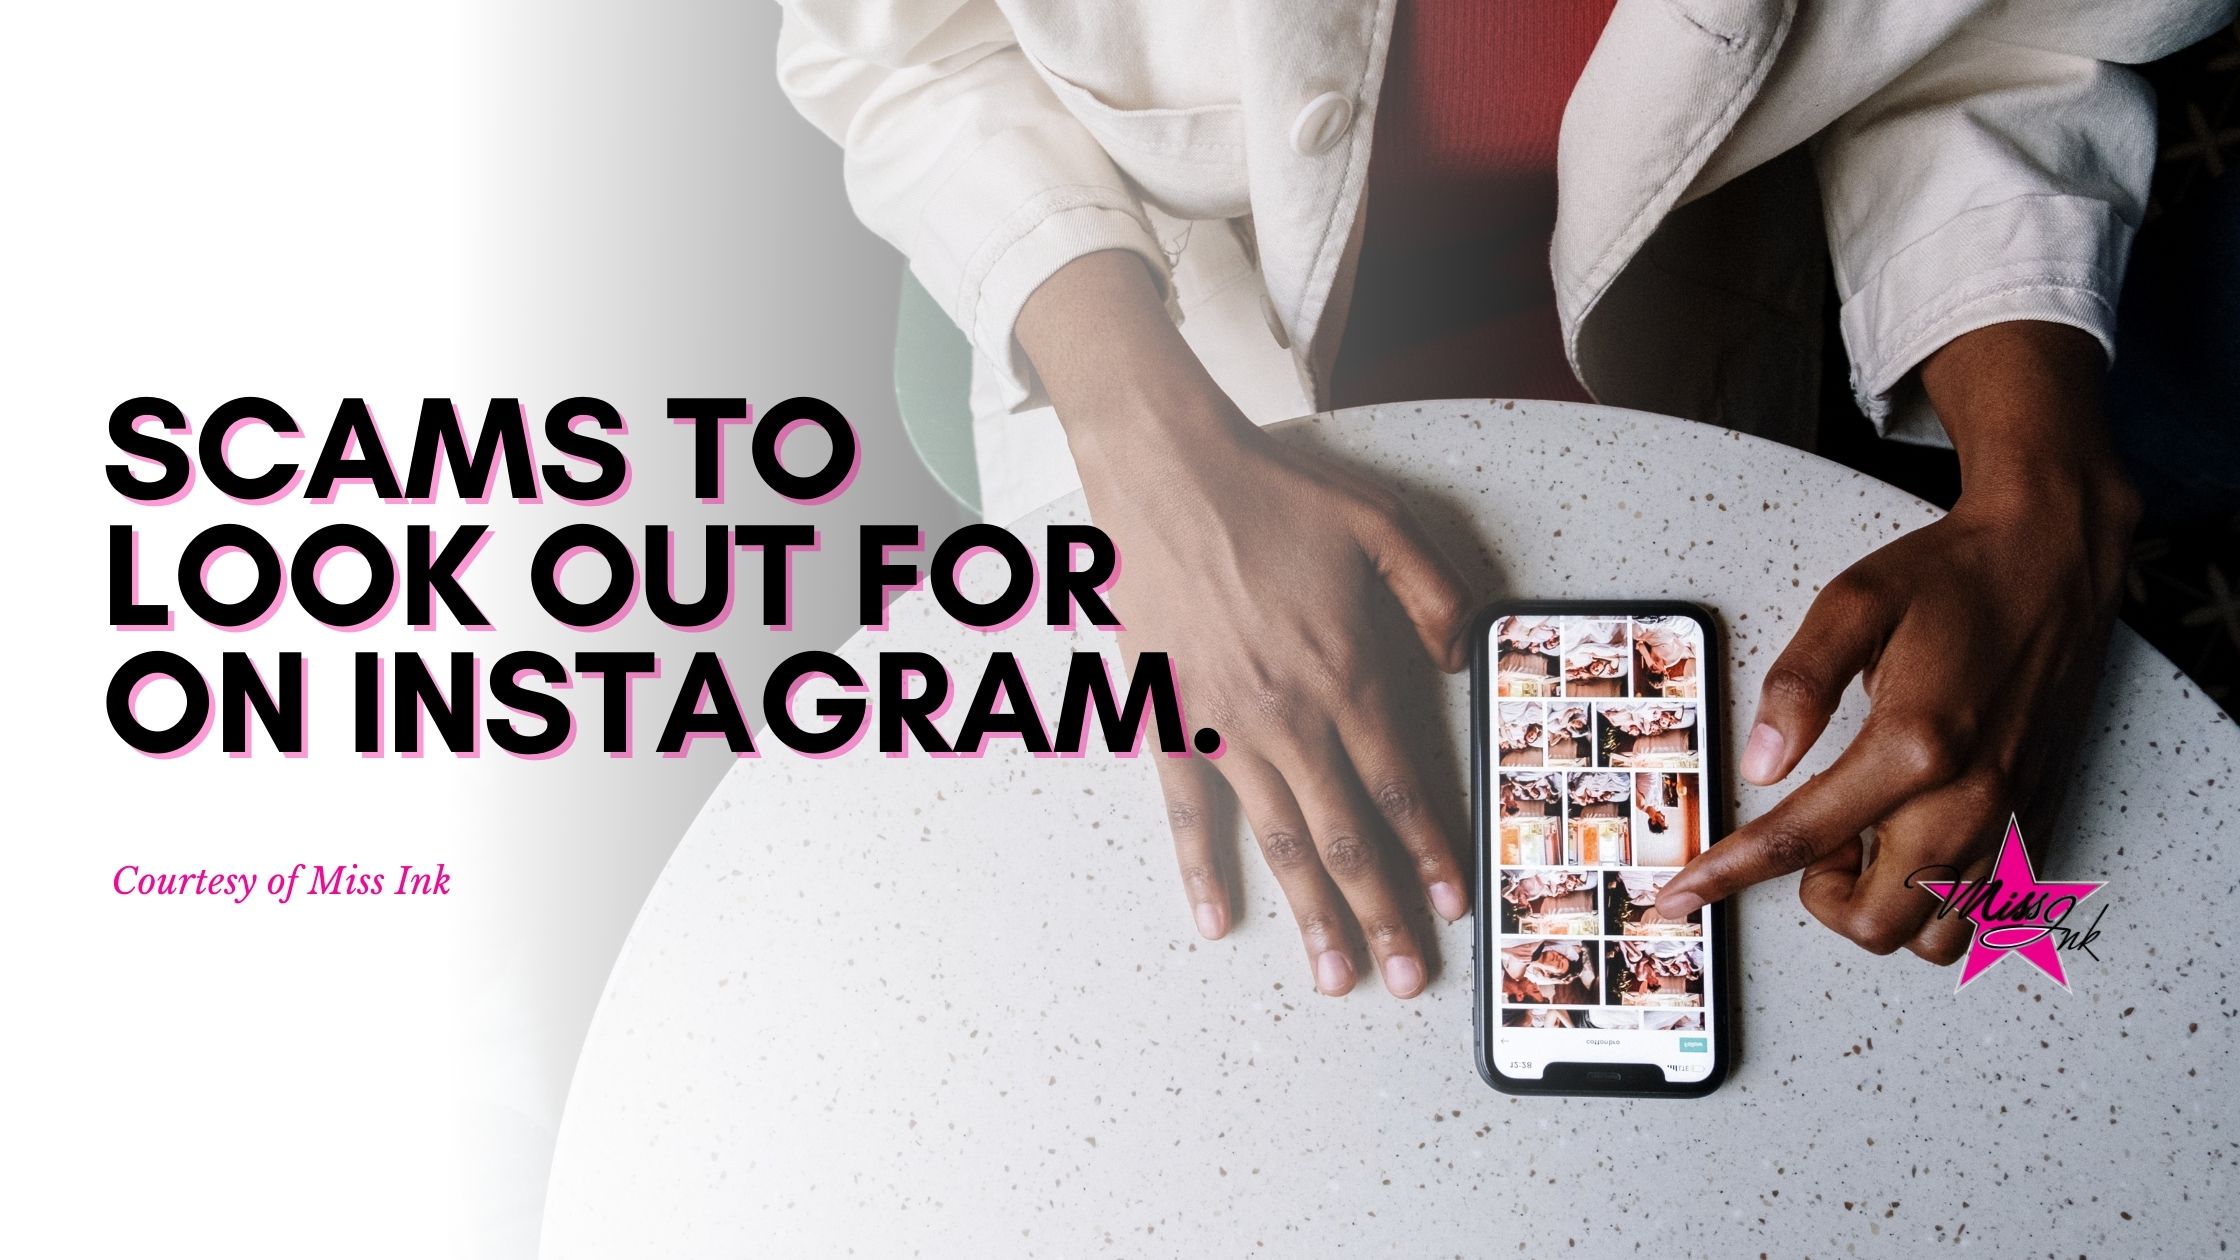 Scams To Look Out For On Instagram.